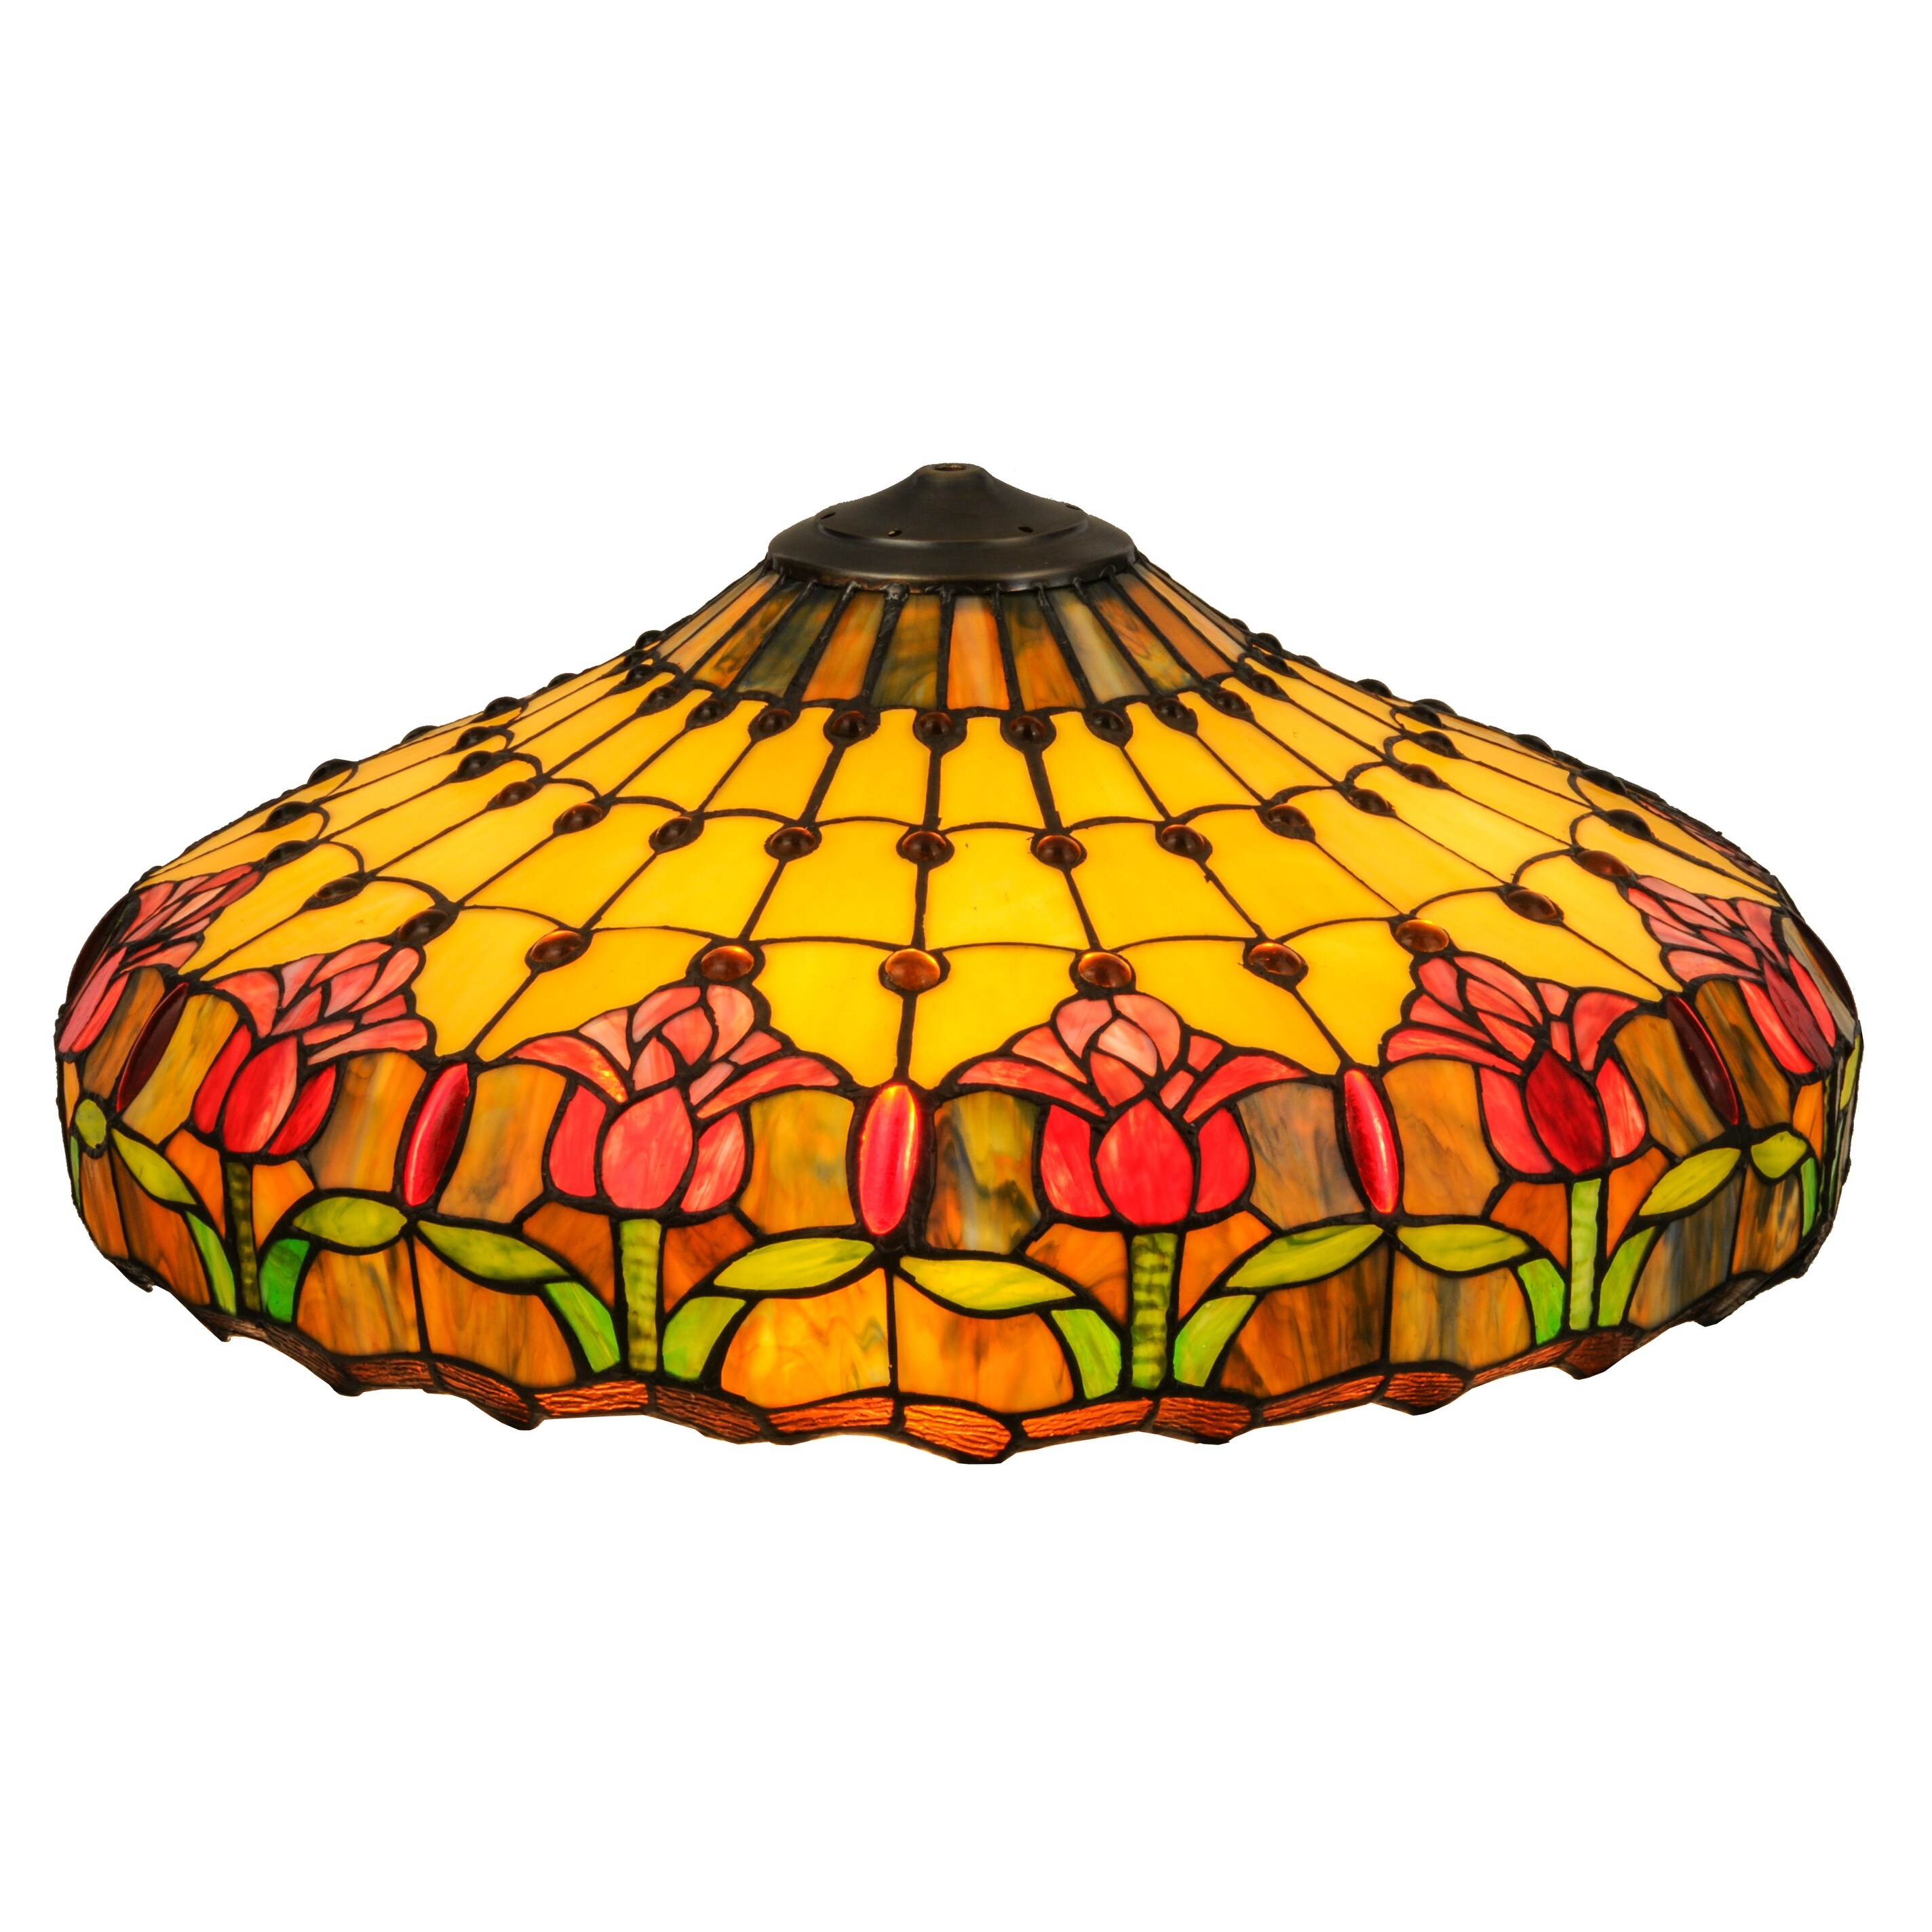 22 In. Wide Colonial Tulip Shade - image 1 of 1